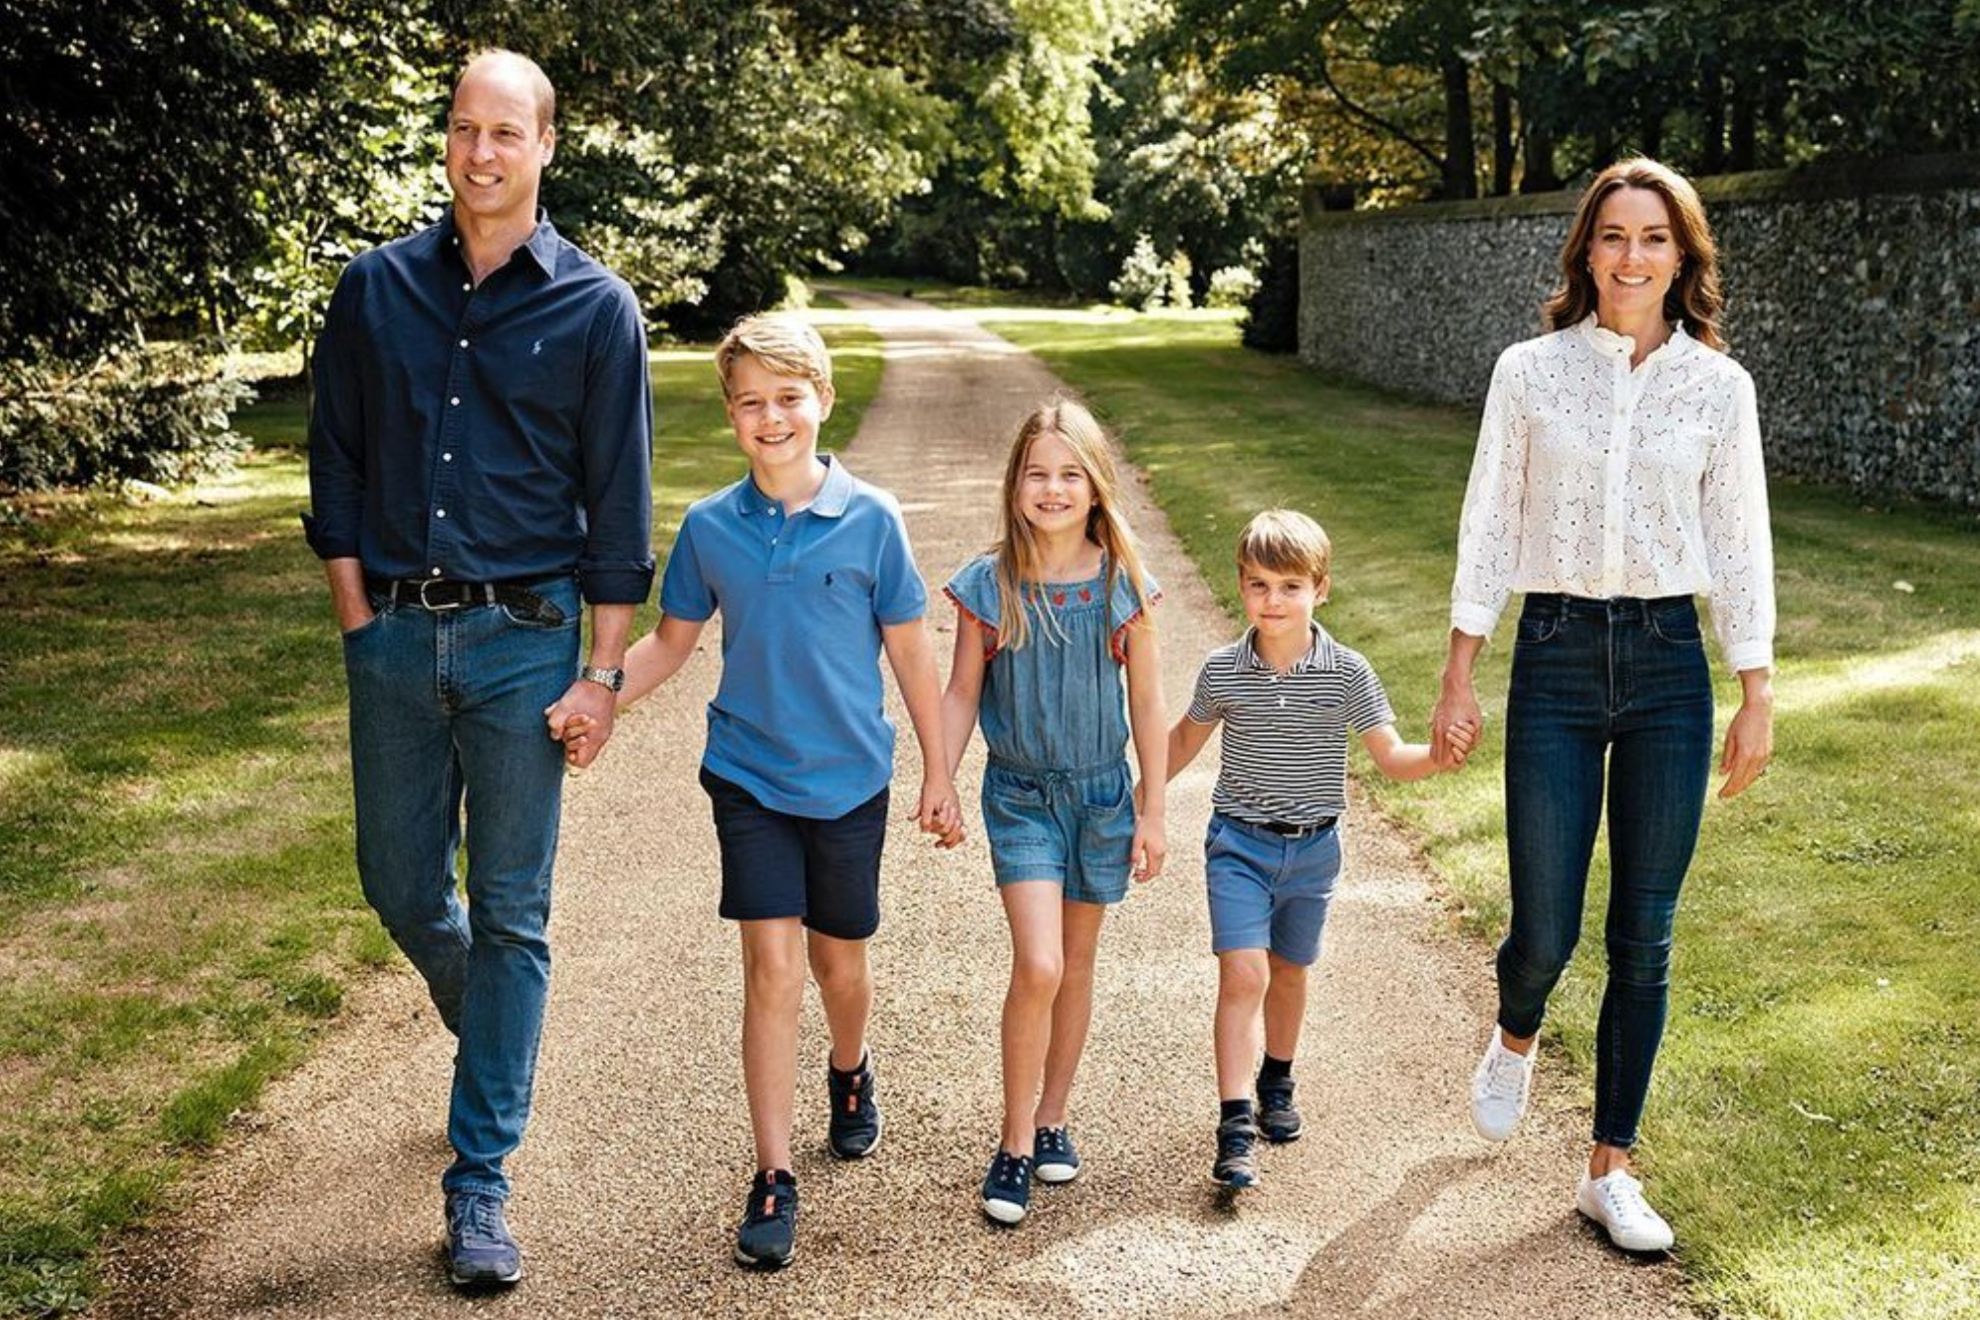 The Prince and Princess of Wales with her children George, Charlotte and Louis.